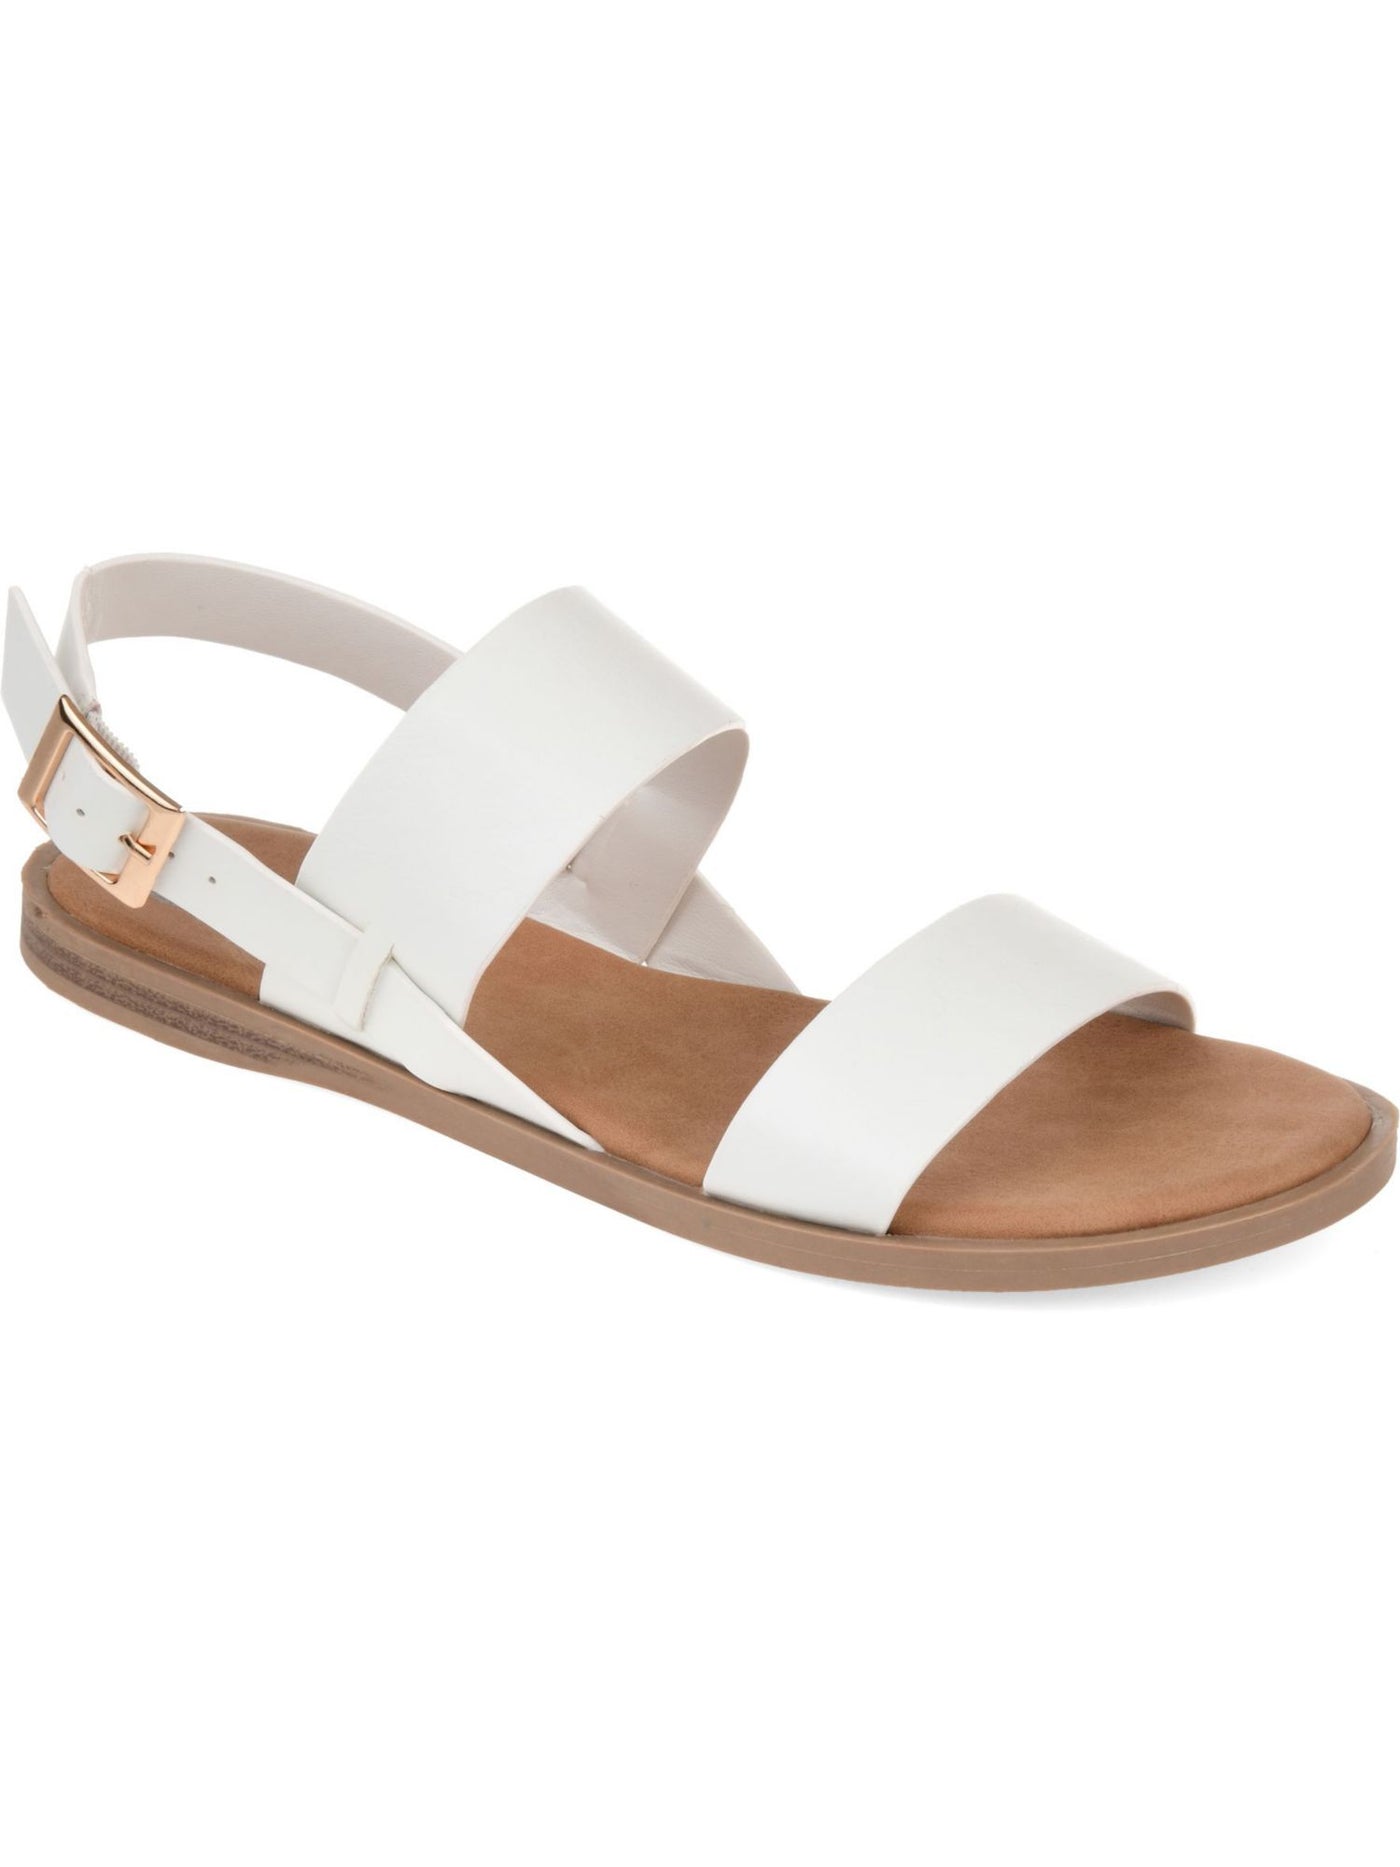 JOURNEE COLLECTION Womens White Cushioned Lavine Round Toe Buckle Slingback Sandal 12